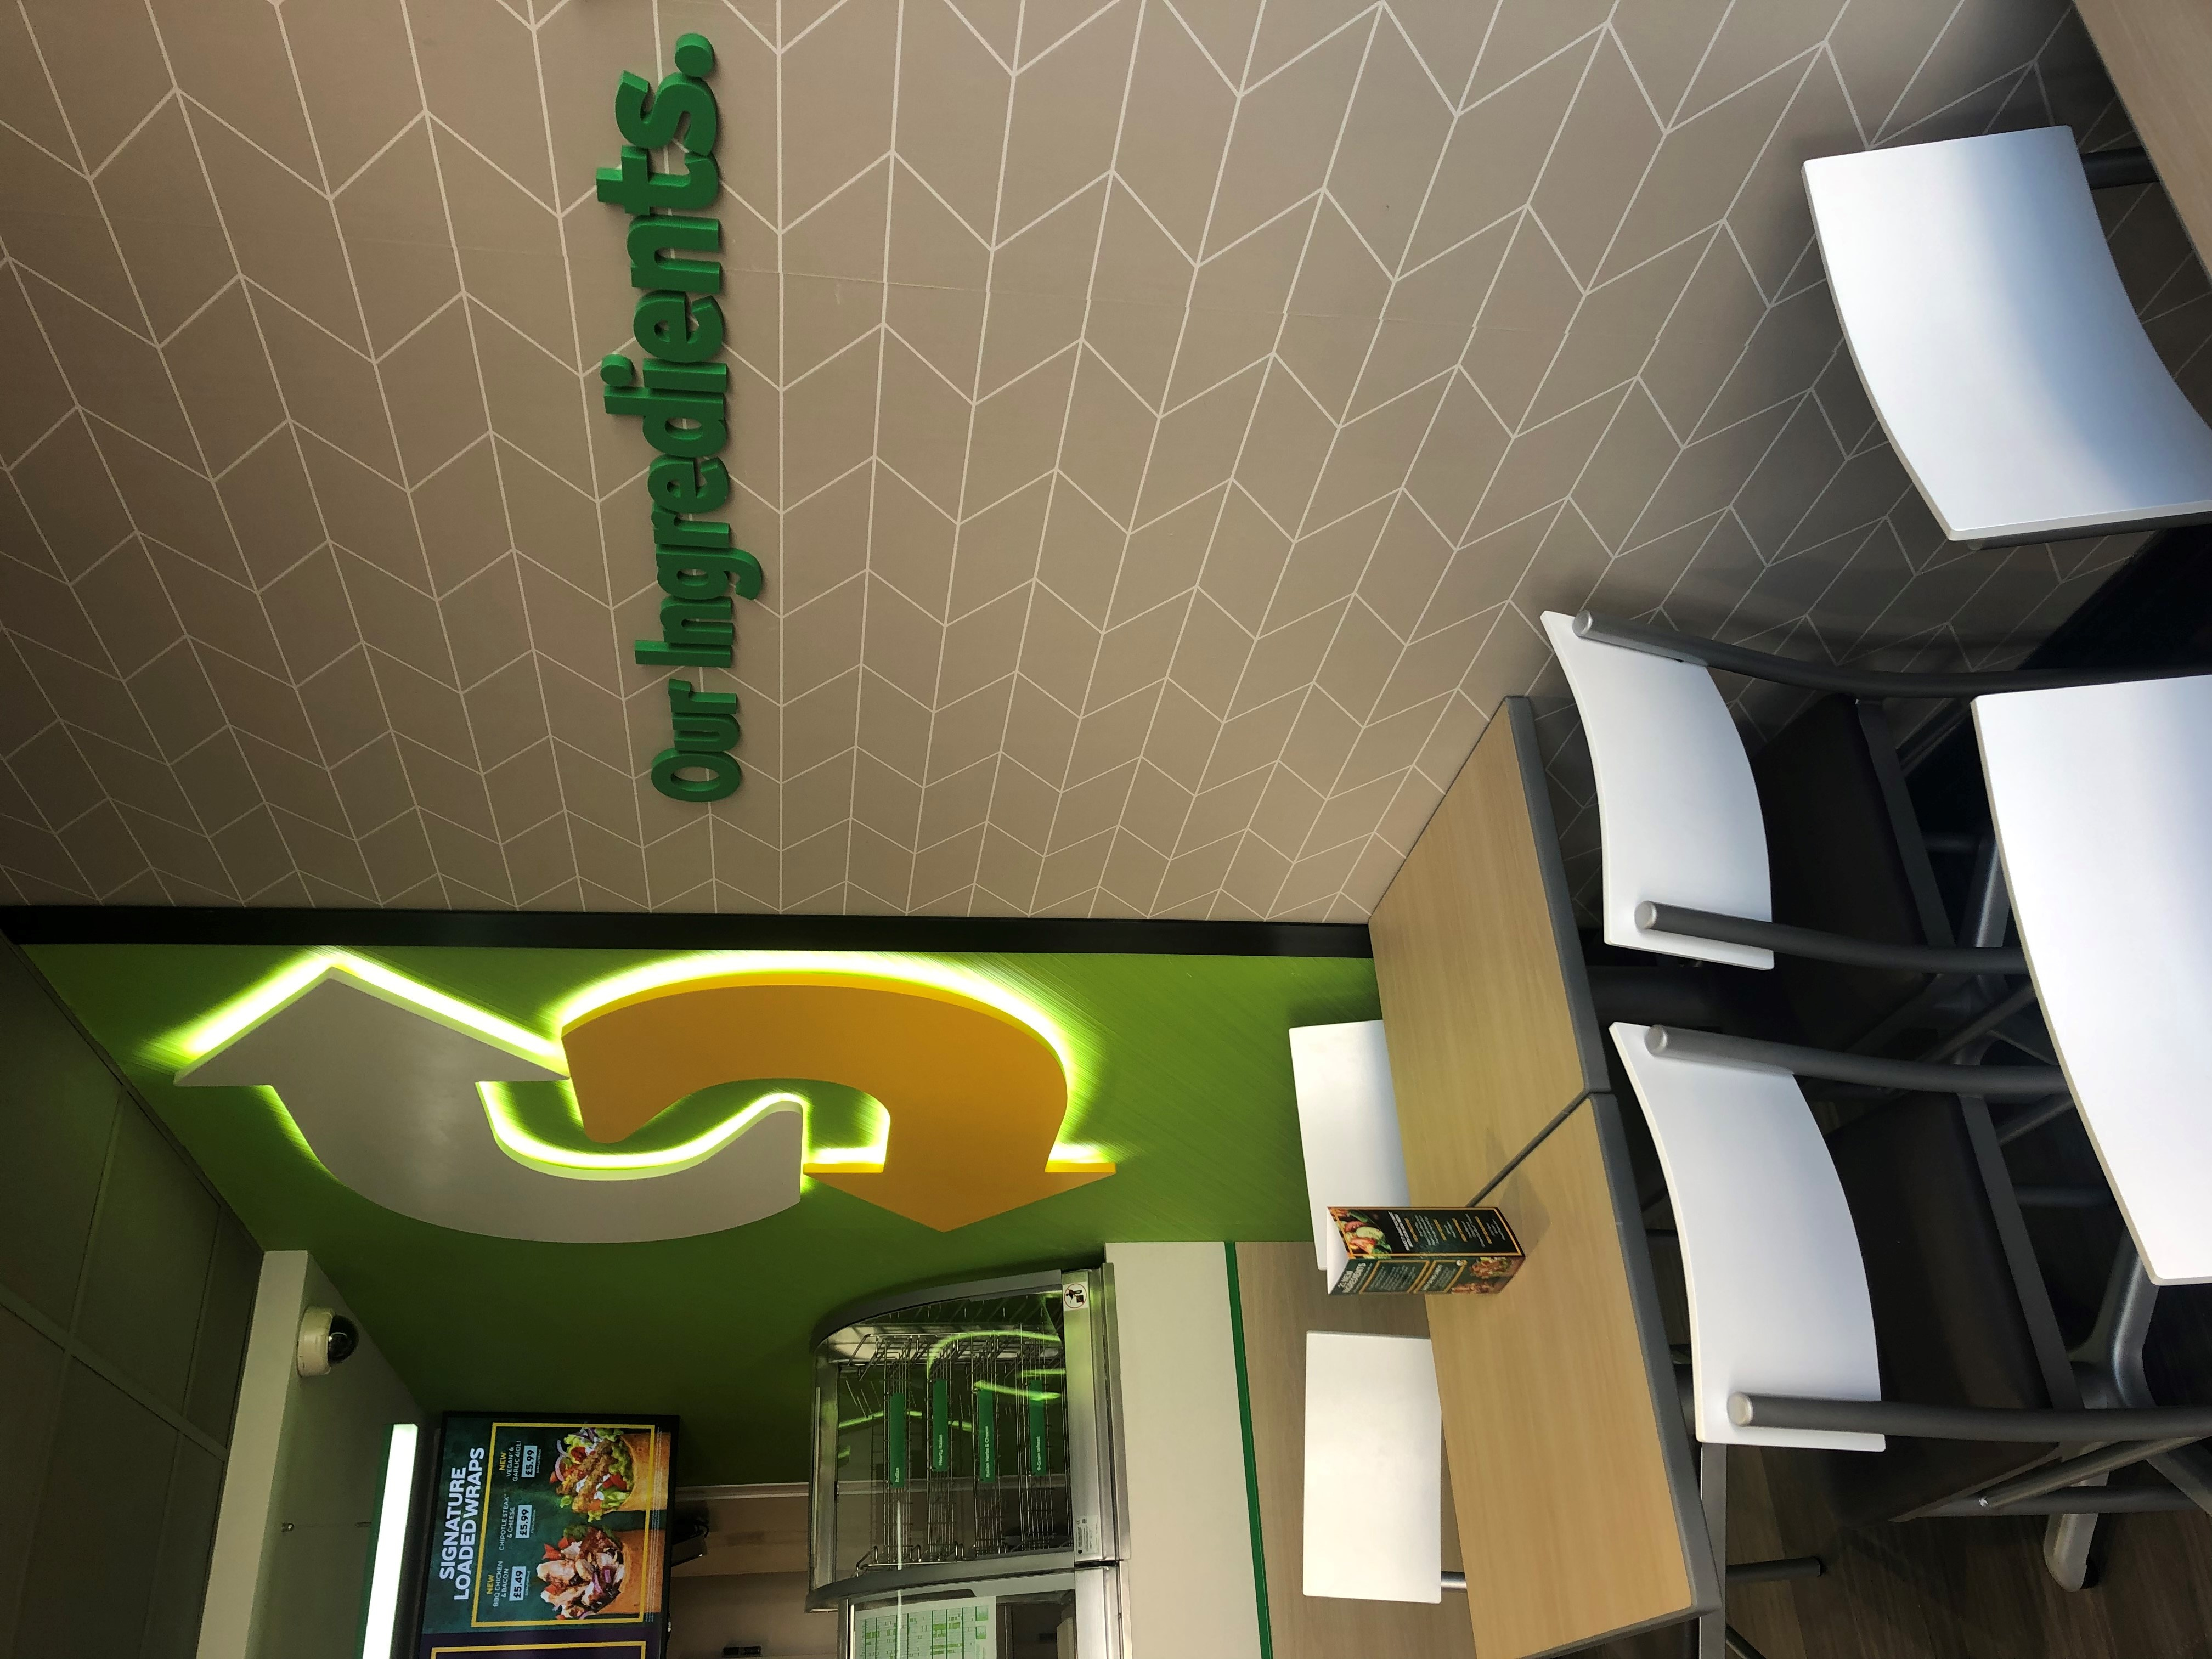 Fantastic opportunity to own a successful Subway Franchise in Hampshire